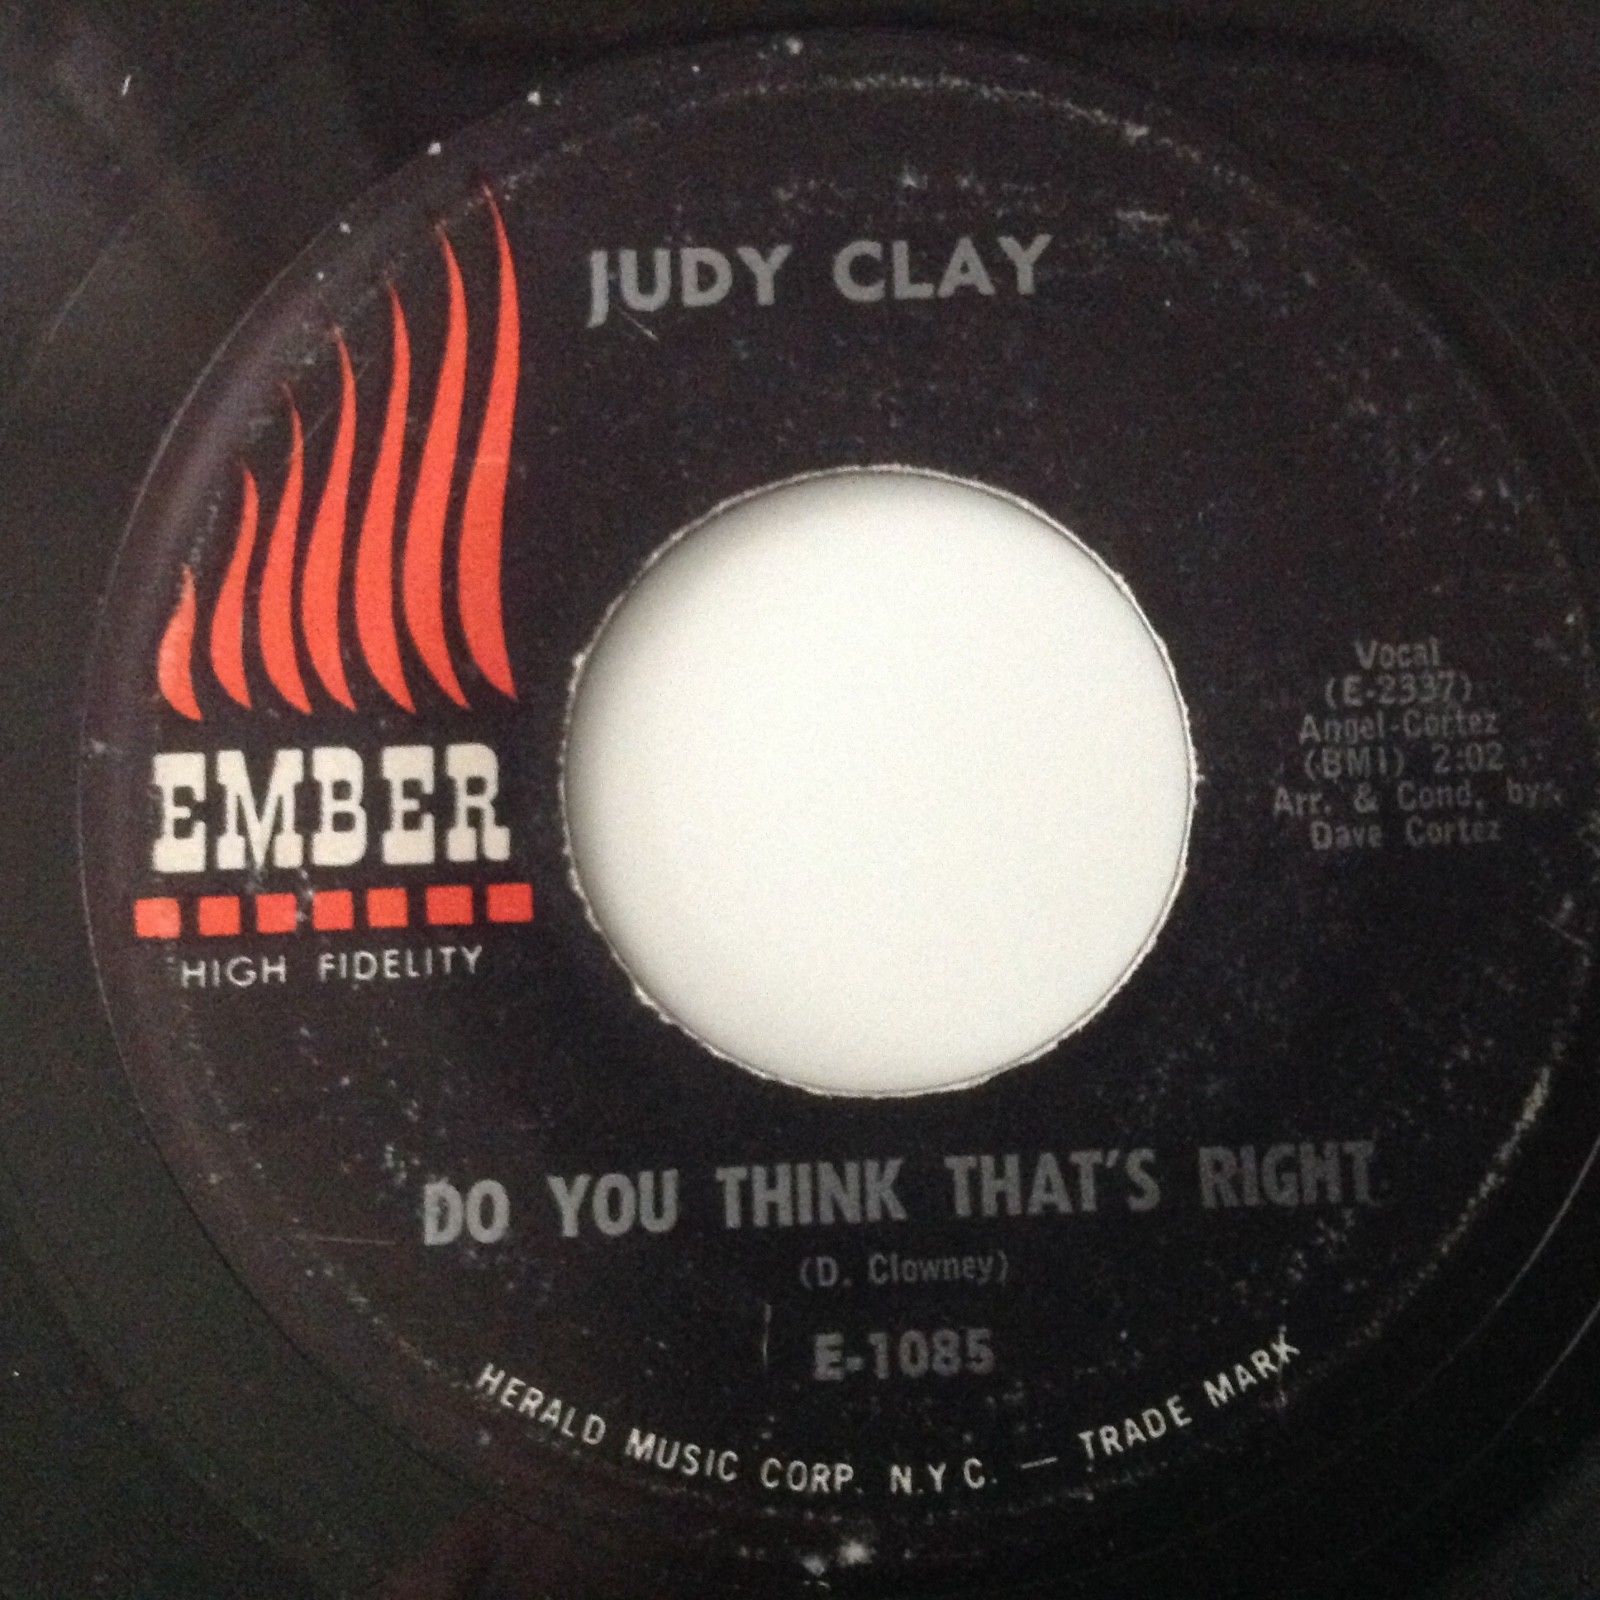 JUDY CLAY - DO YOU THINK THAT'S RIGHT / STORMY WEATHER - EMBER. VG+.JKELLY